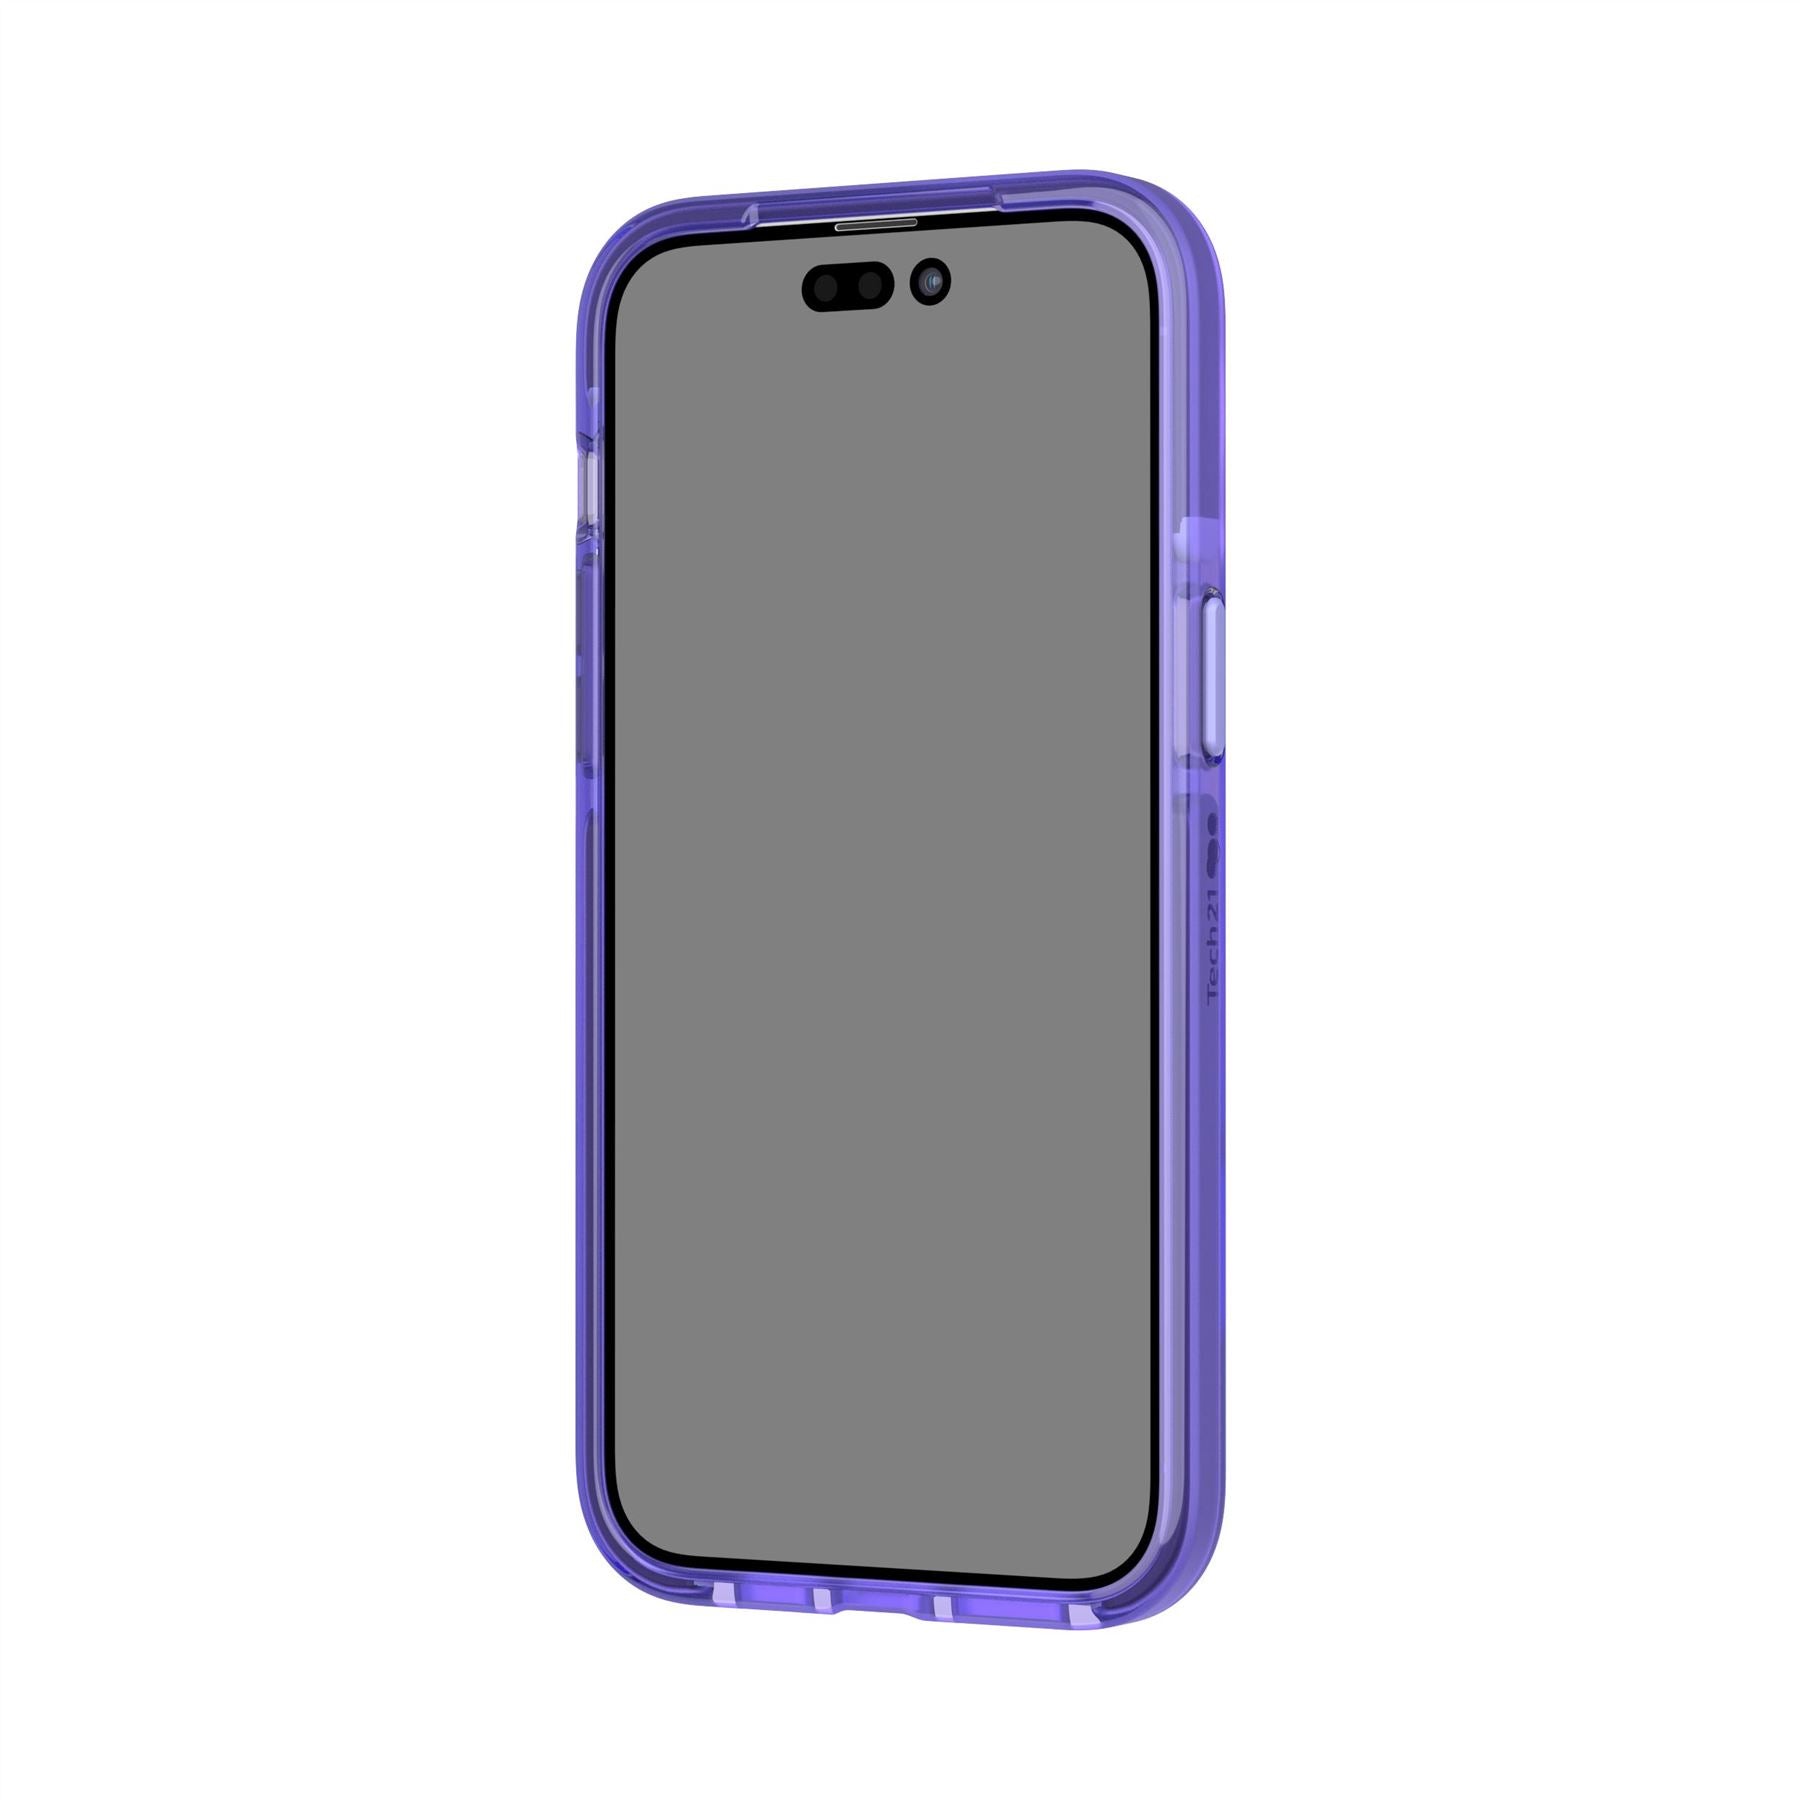 iPhone 12 Pro Max Flawless Checkered Glass Protective Back Case